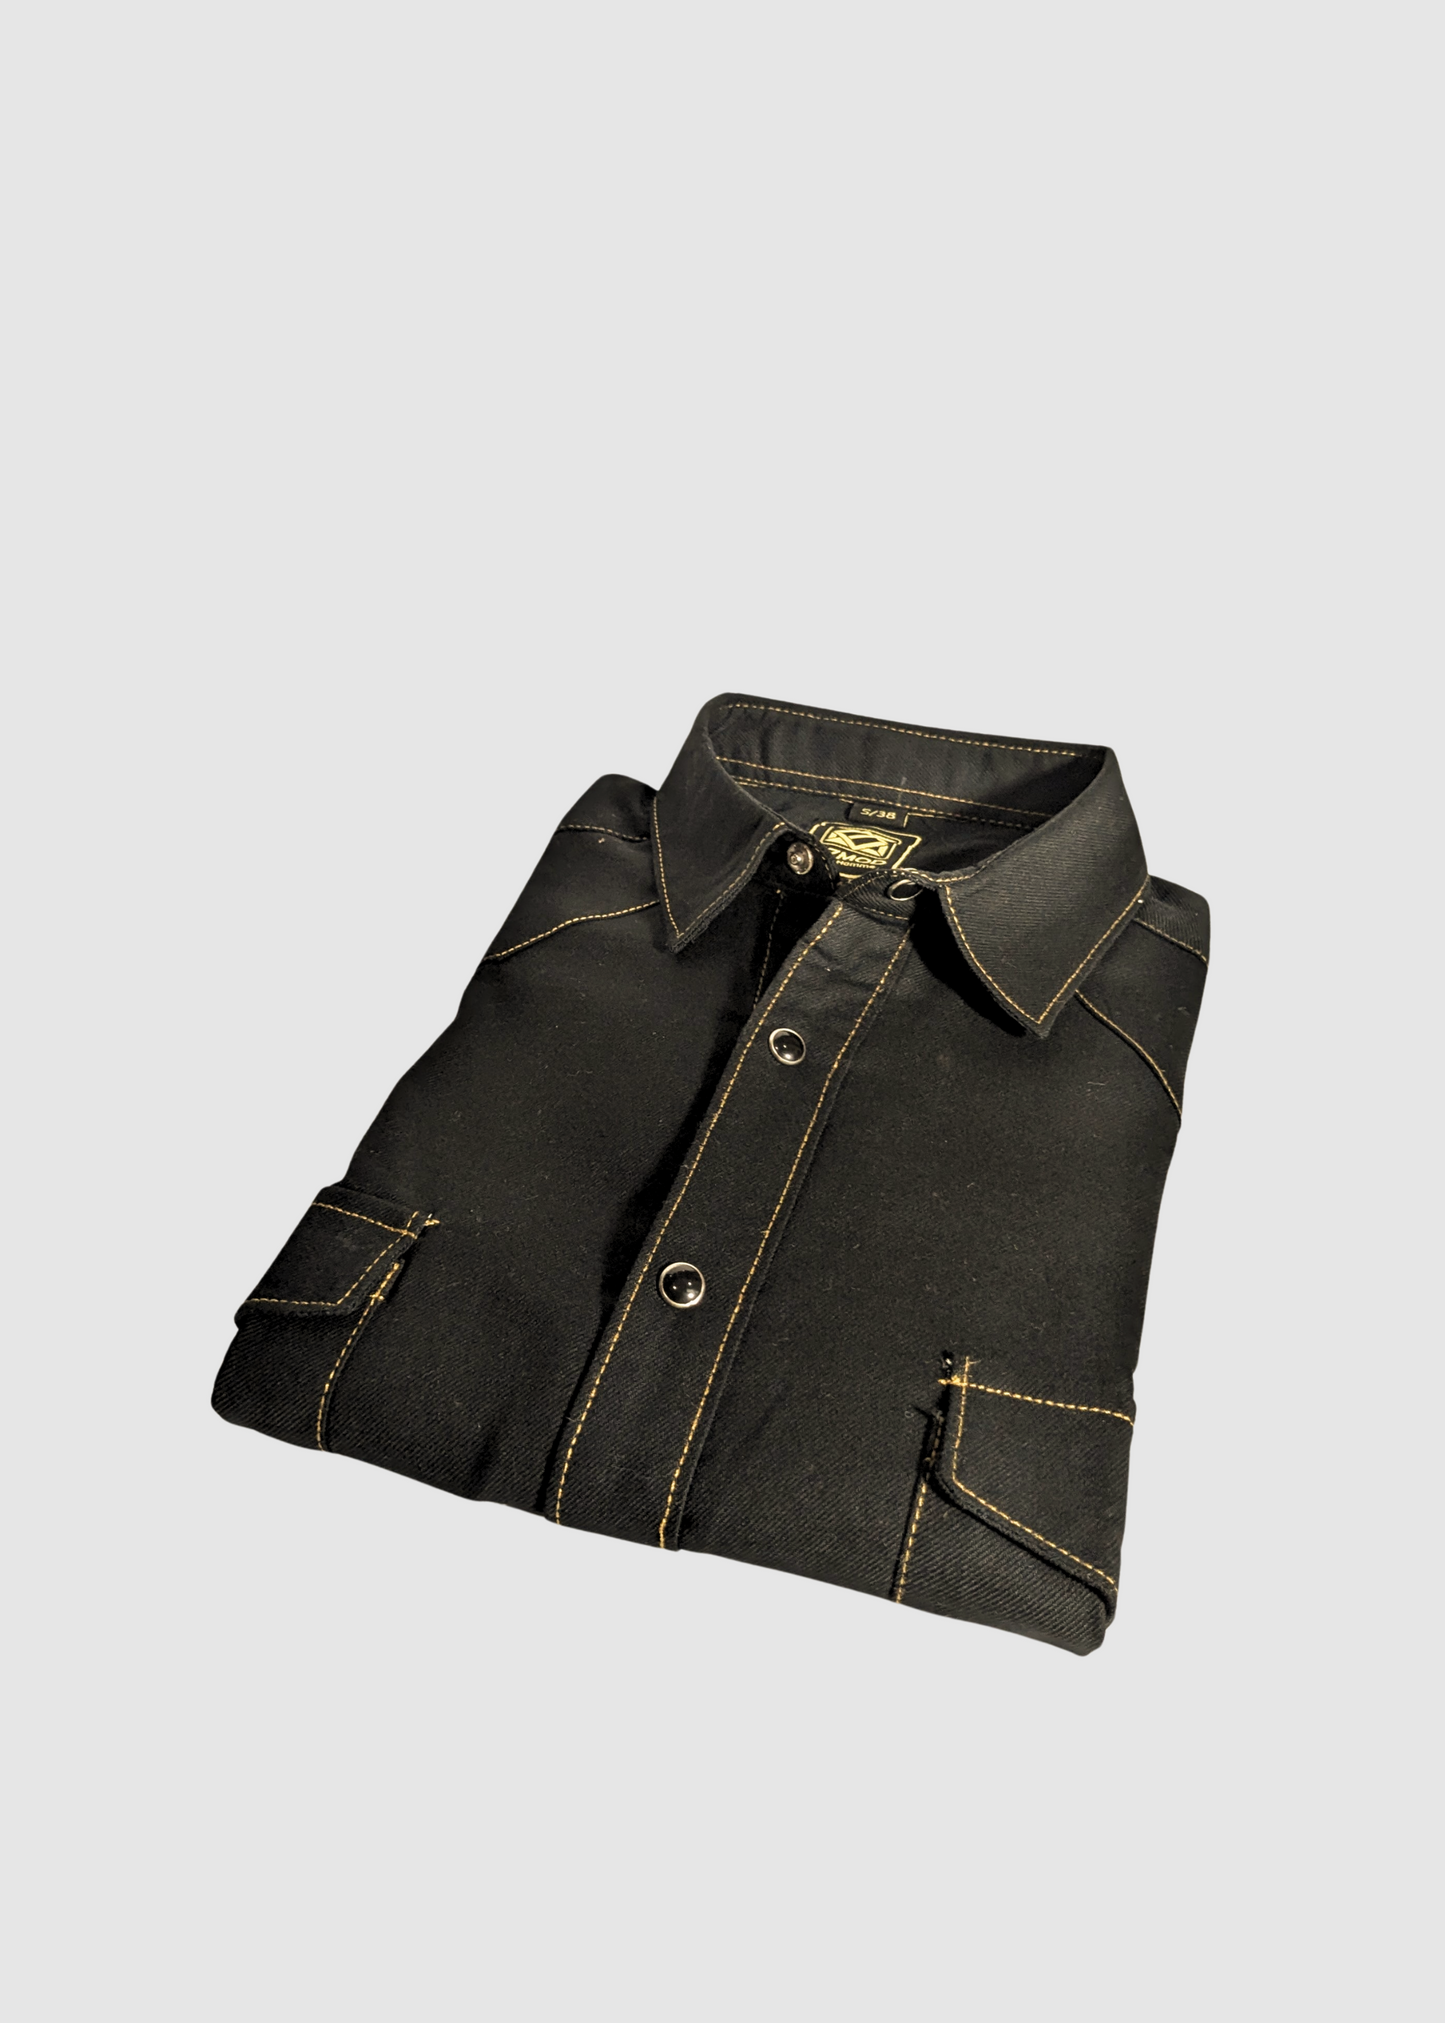 Men's Black Colour Western Shirt in Twill Cotton with Western Yoke